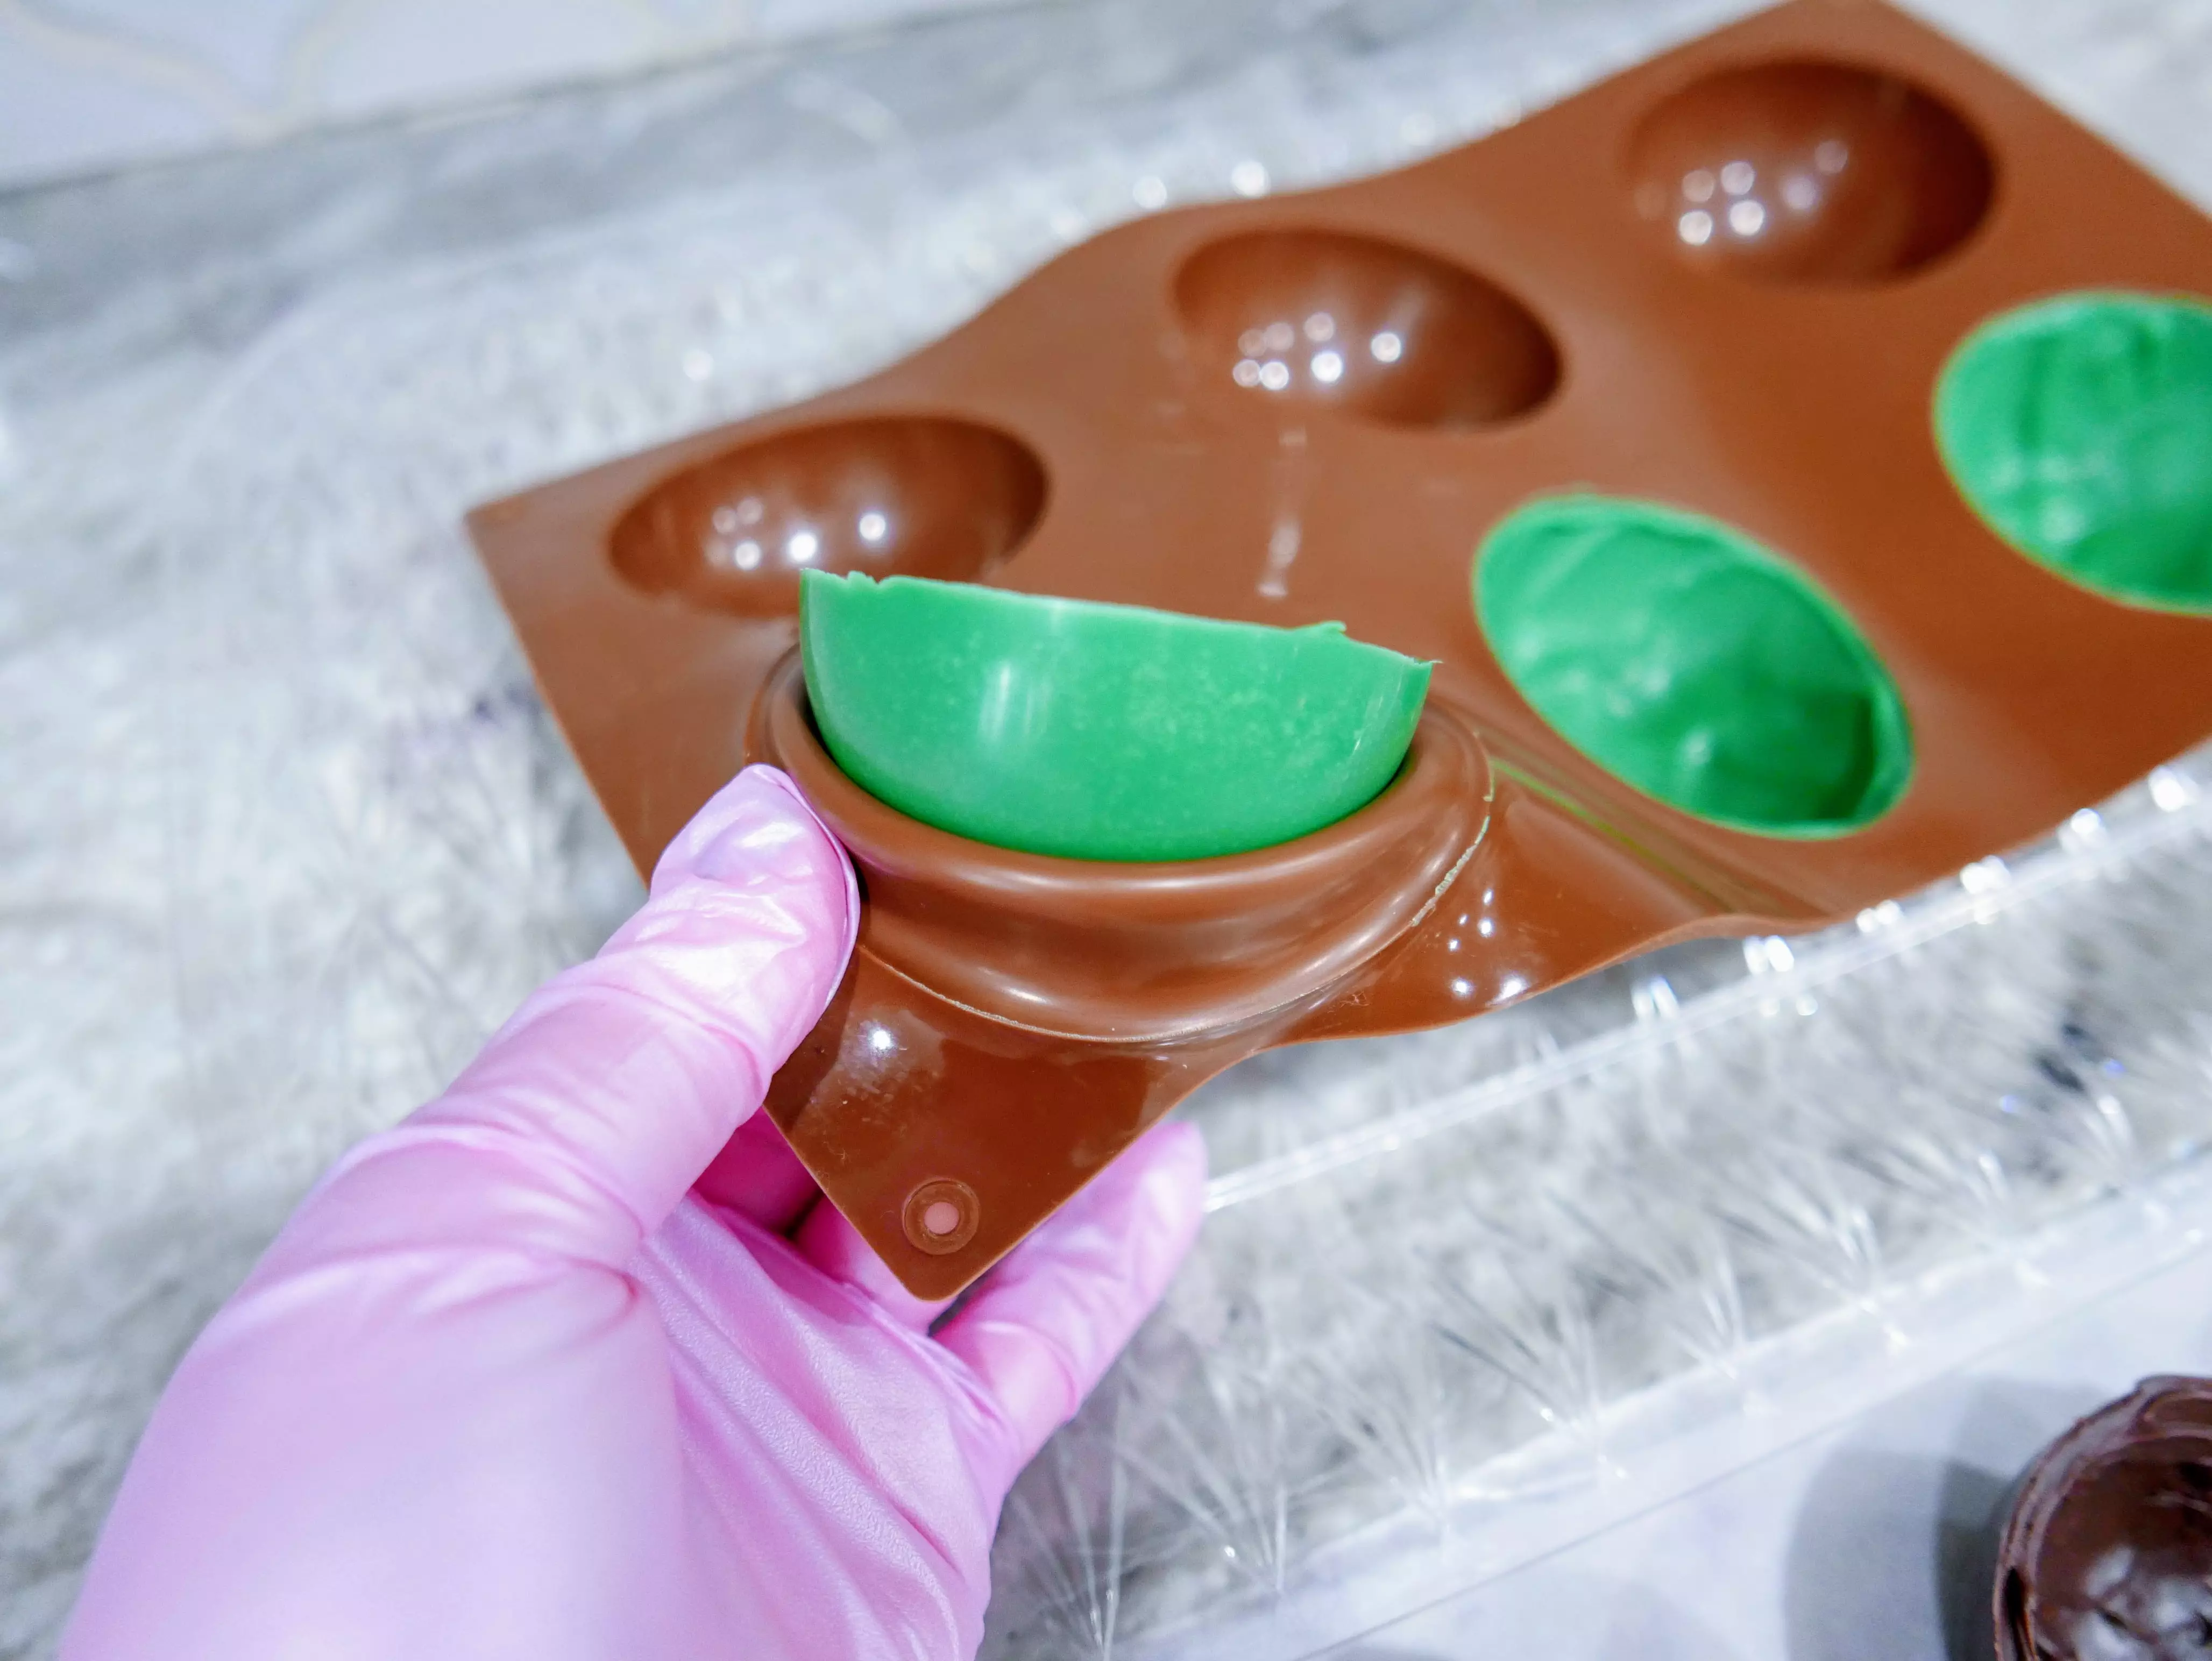 removing candy domes from silicone mold